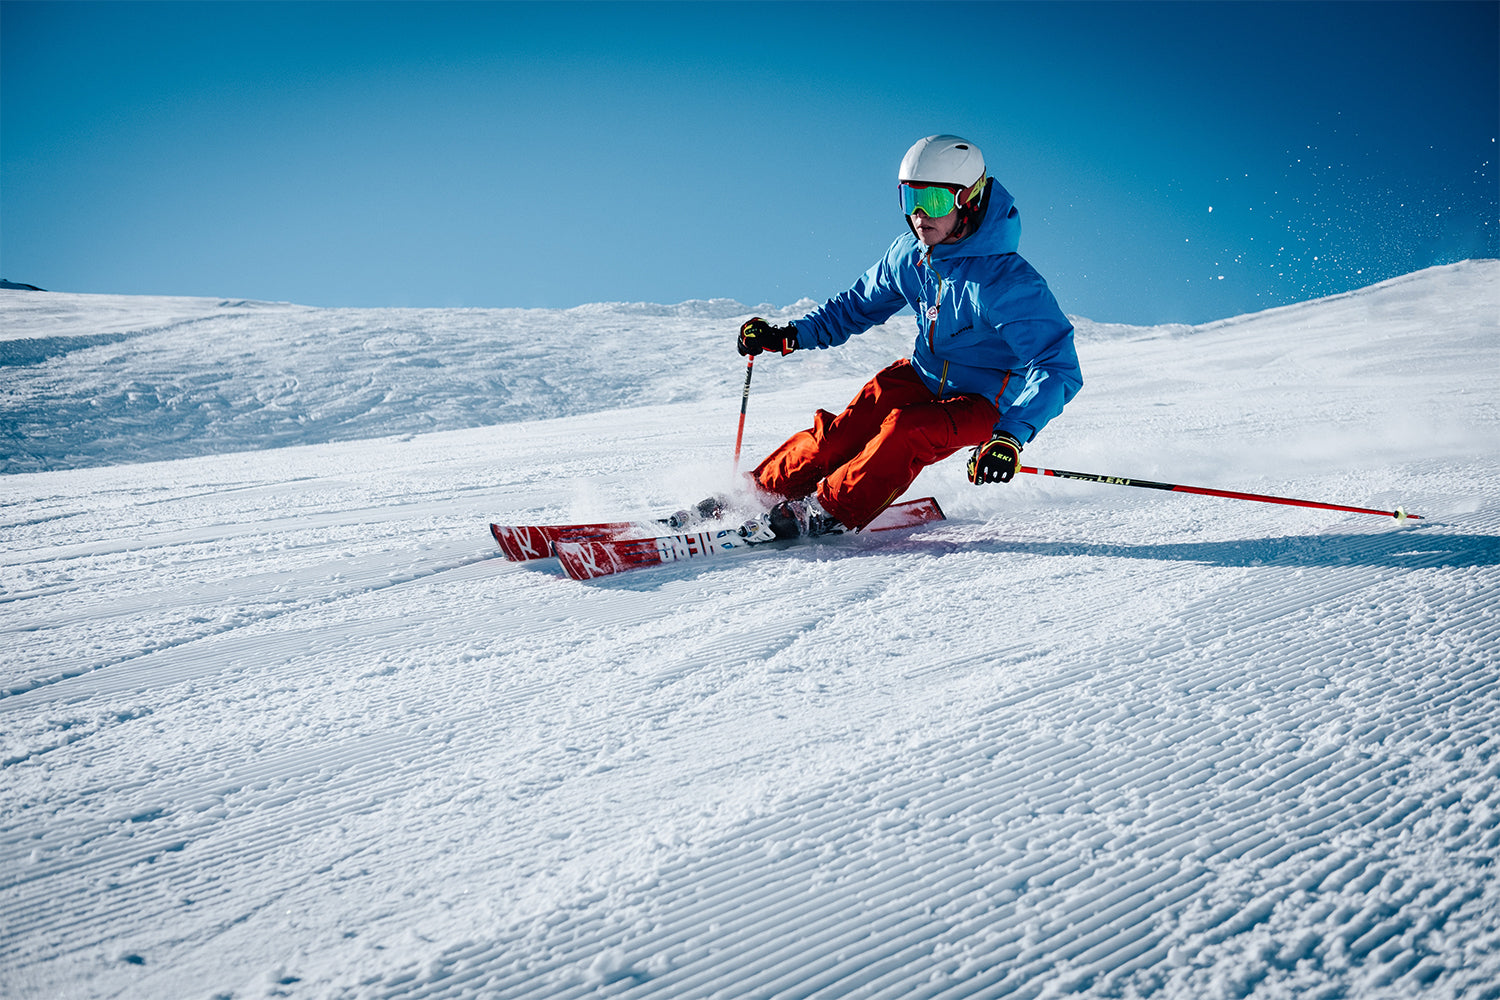 A Man In Winter Gear Skiing Down A Slope